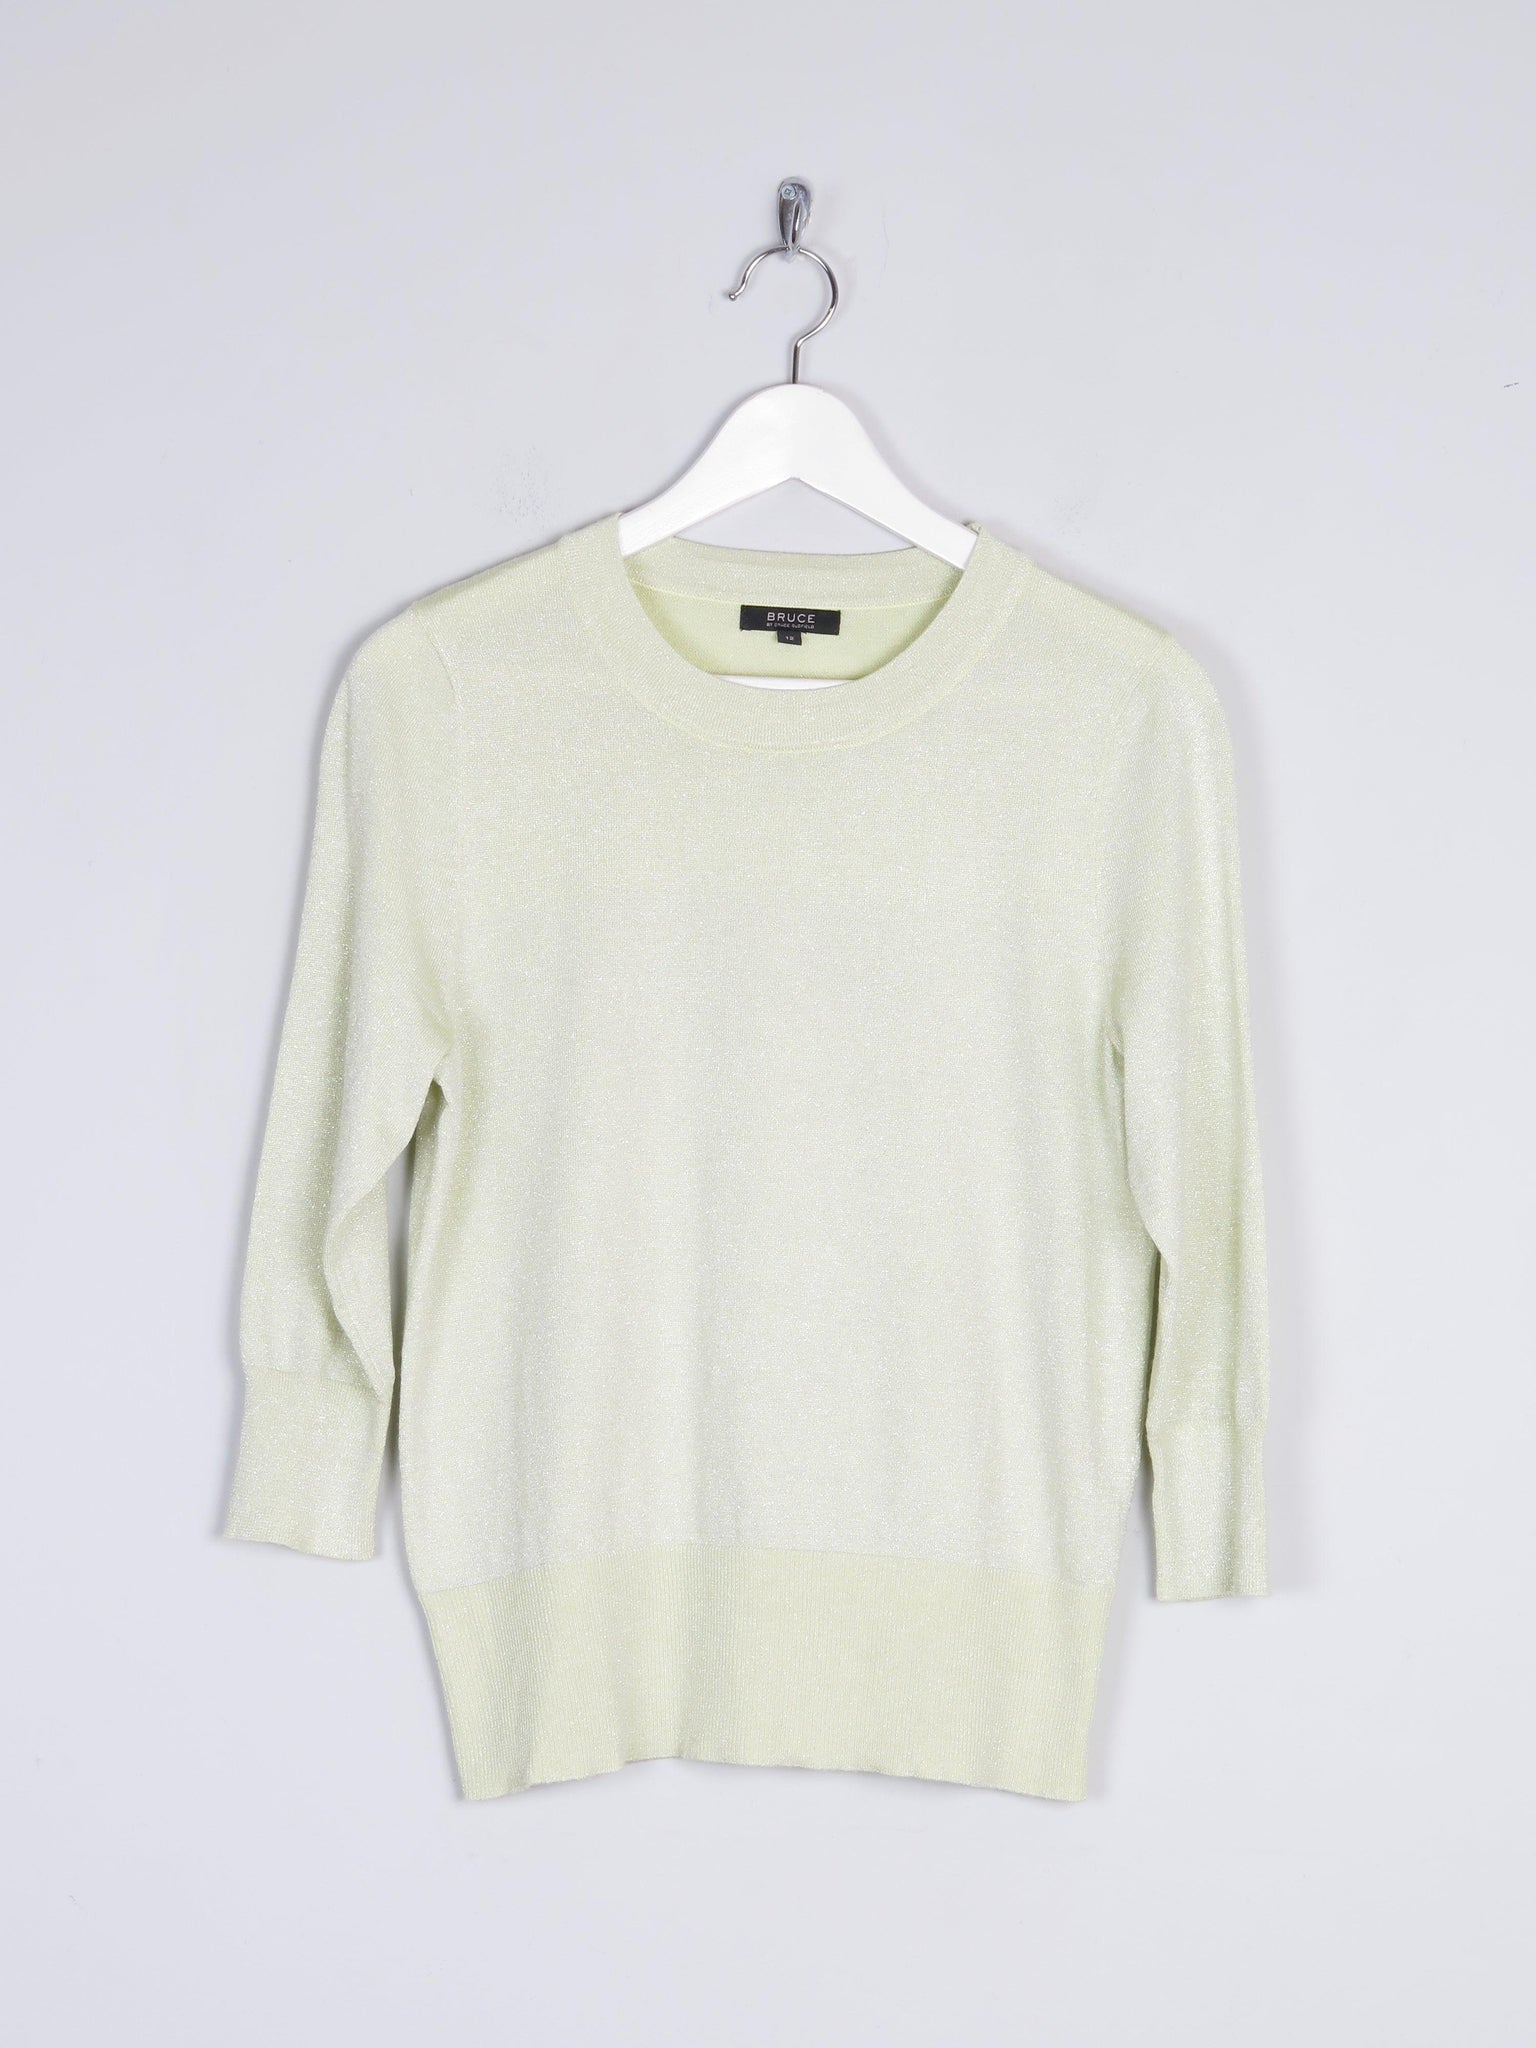 Women’s Lime Green Bruce By Bruce Oldfield Lurex Knit Style Top 10/12 - The Harlequin